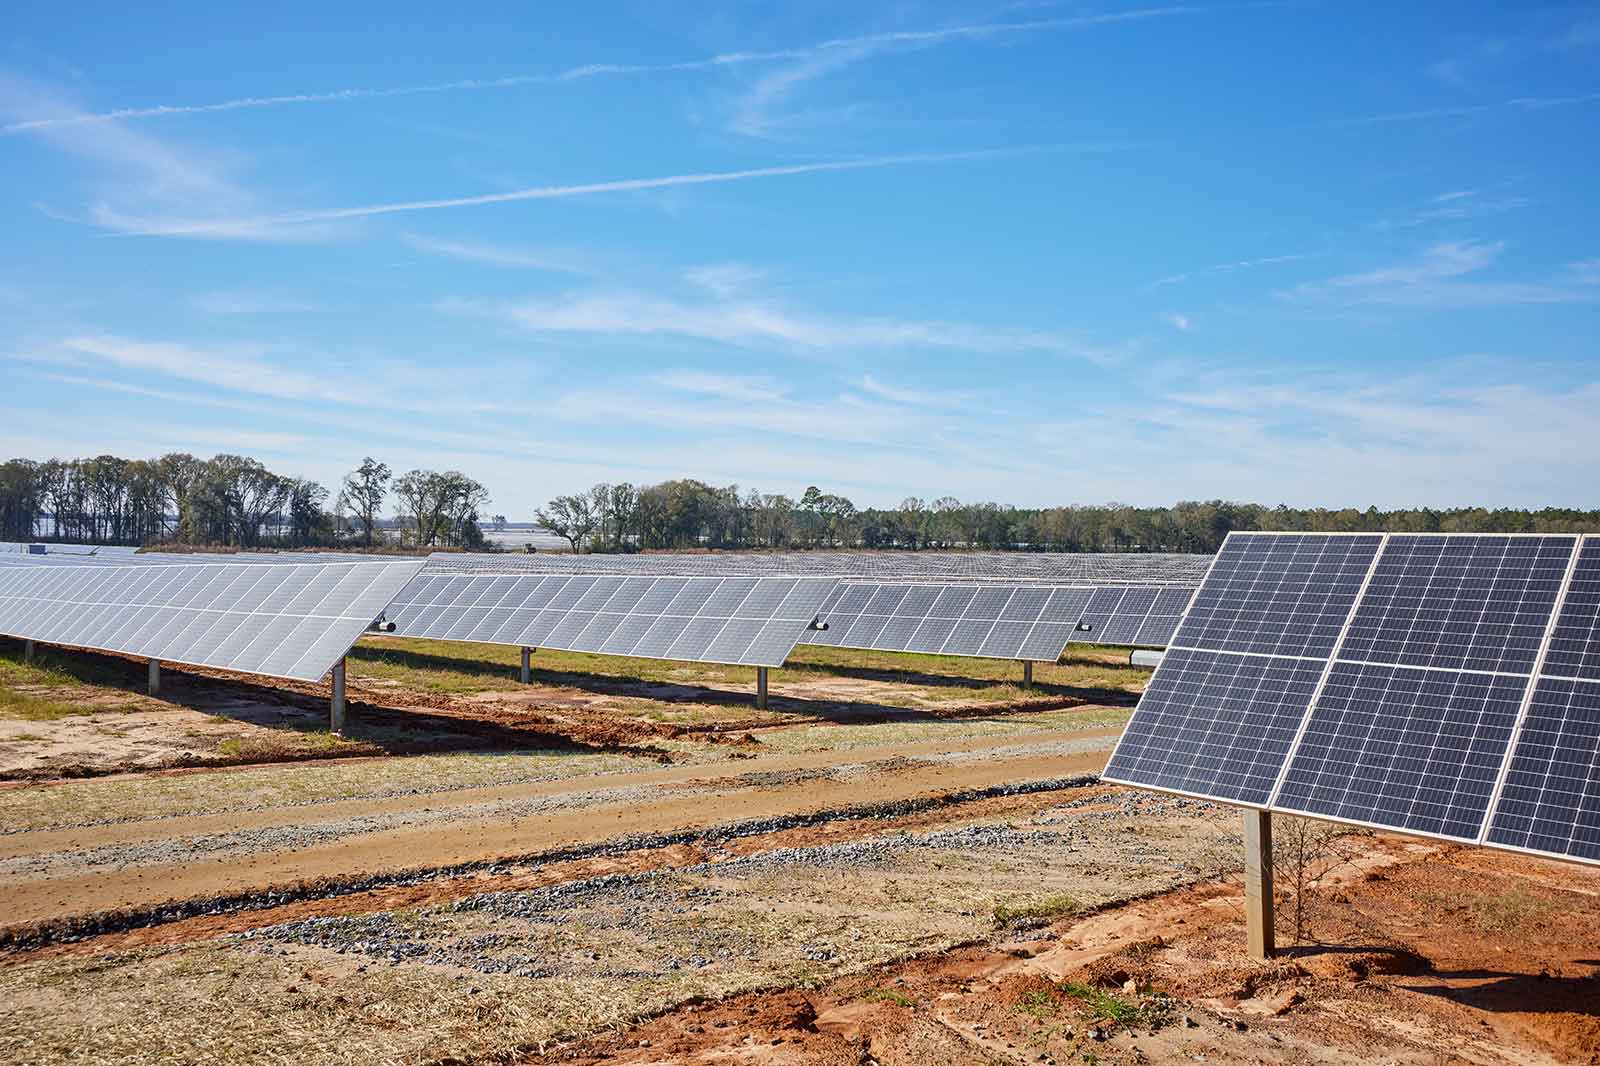 RWE’s U.S. Hickory Park solar project with co-located storage facility in operation